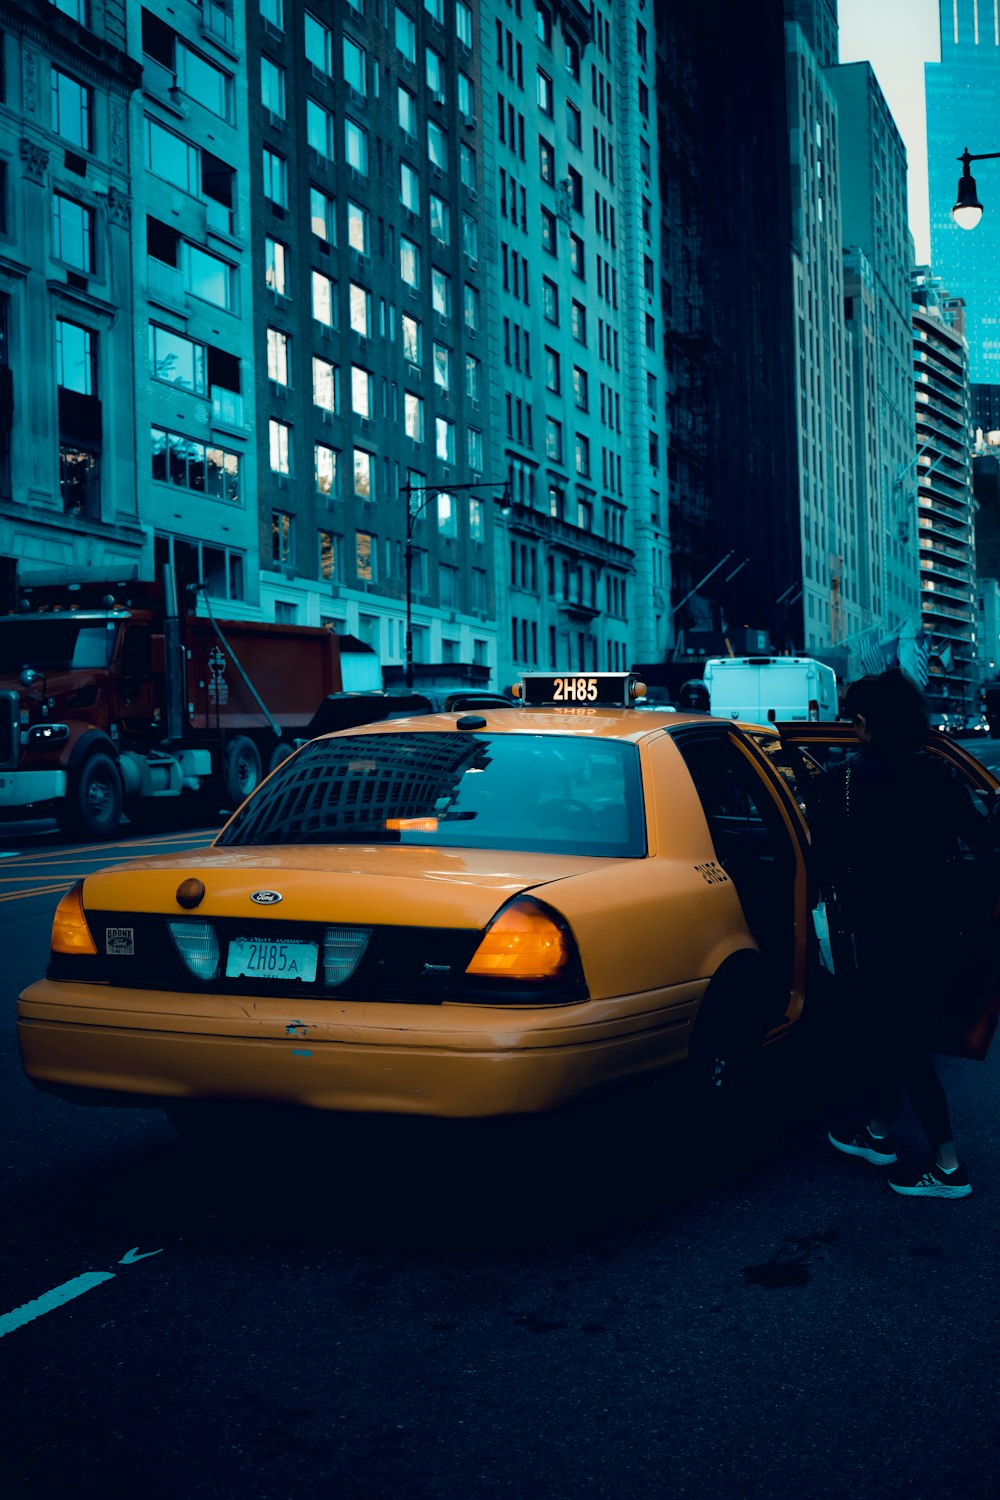 a taxi cab with its door open on a city street